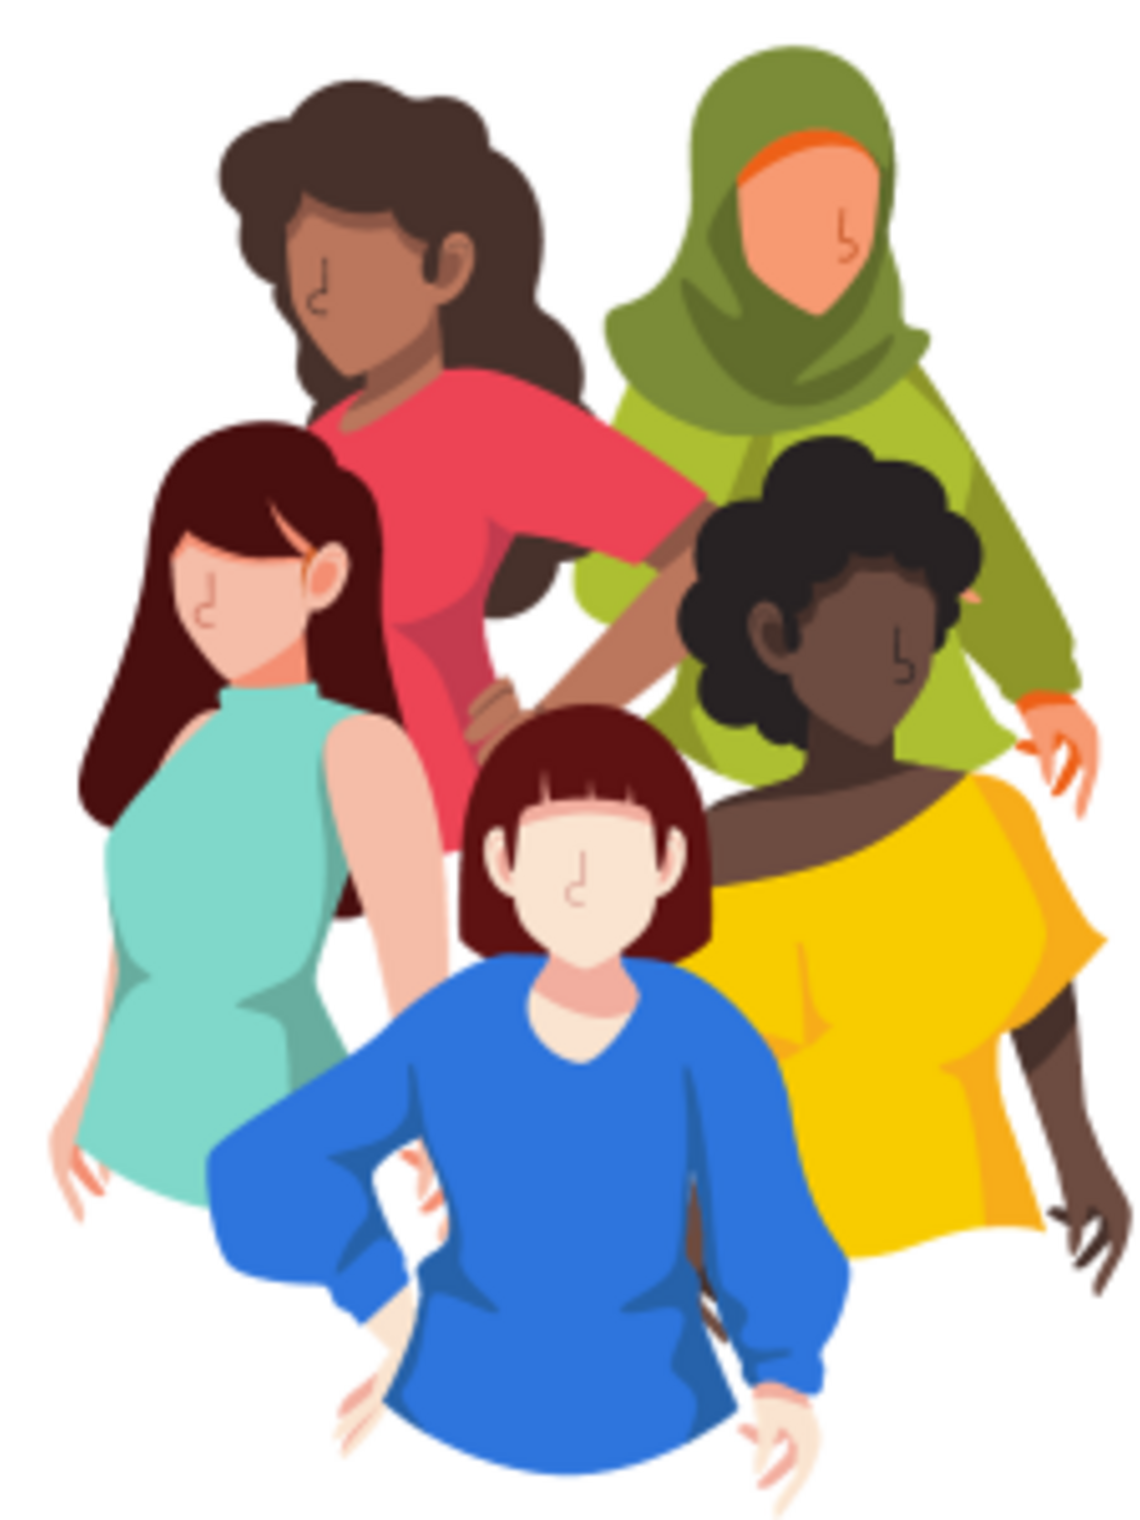 illustrated image of diverse women